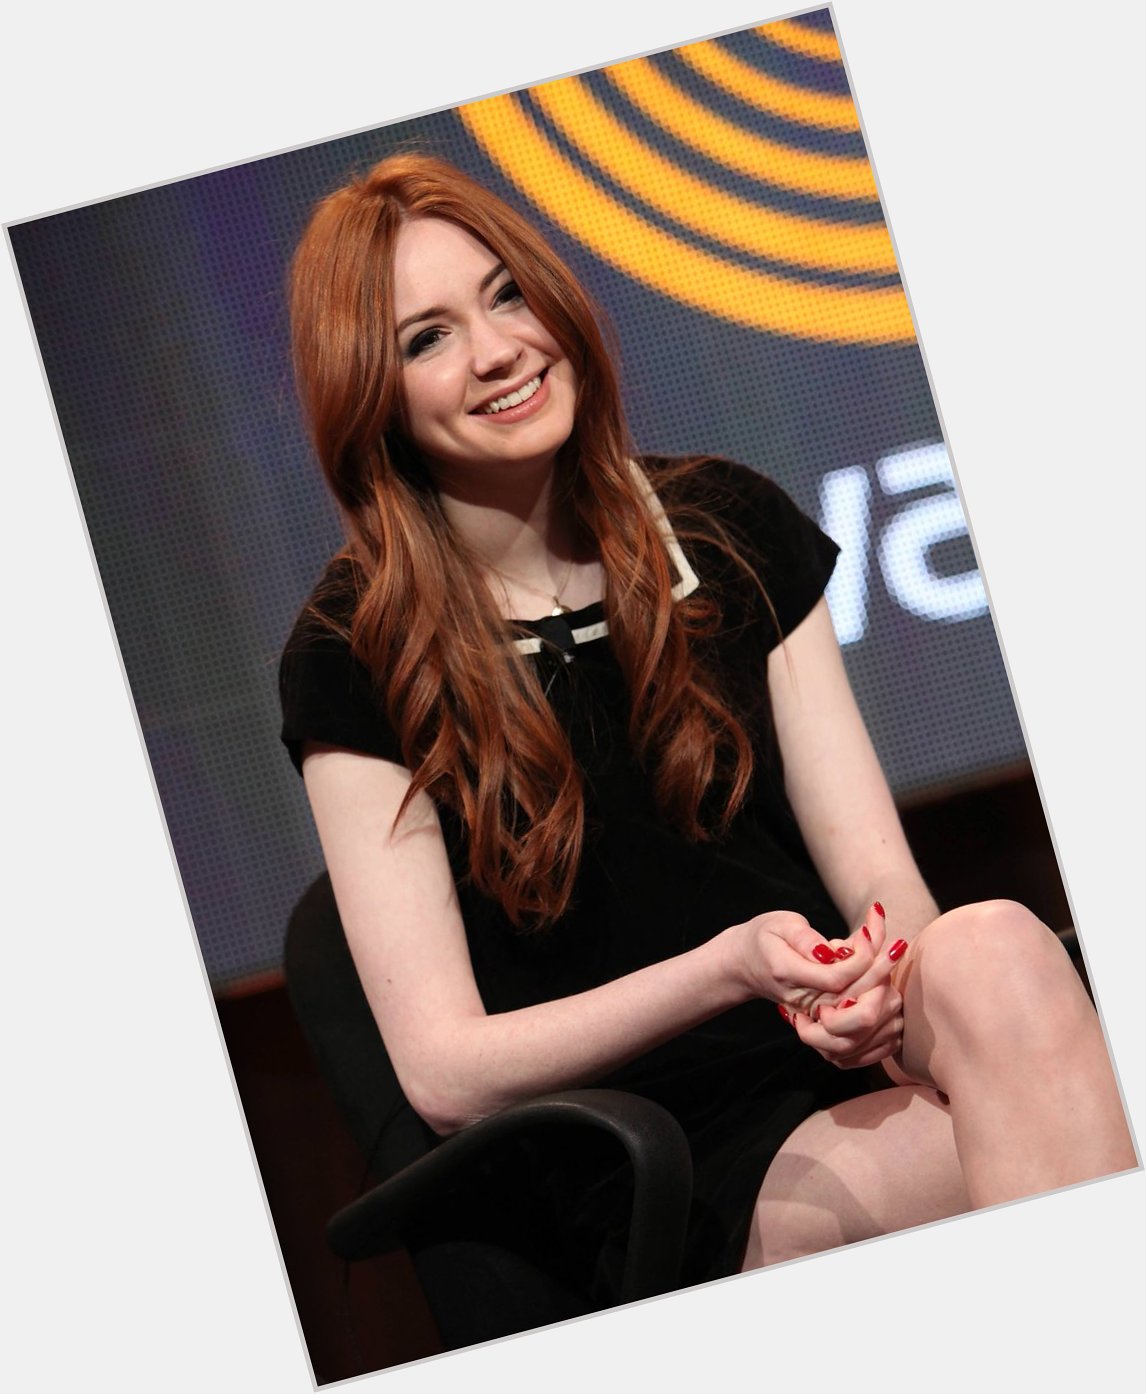 Happy 32nd birthday to the very leggy and radiant redhead and fellow Scot Karen Gillan. 